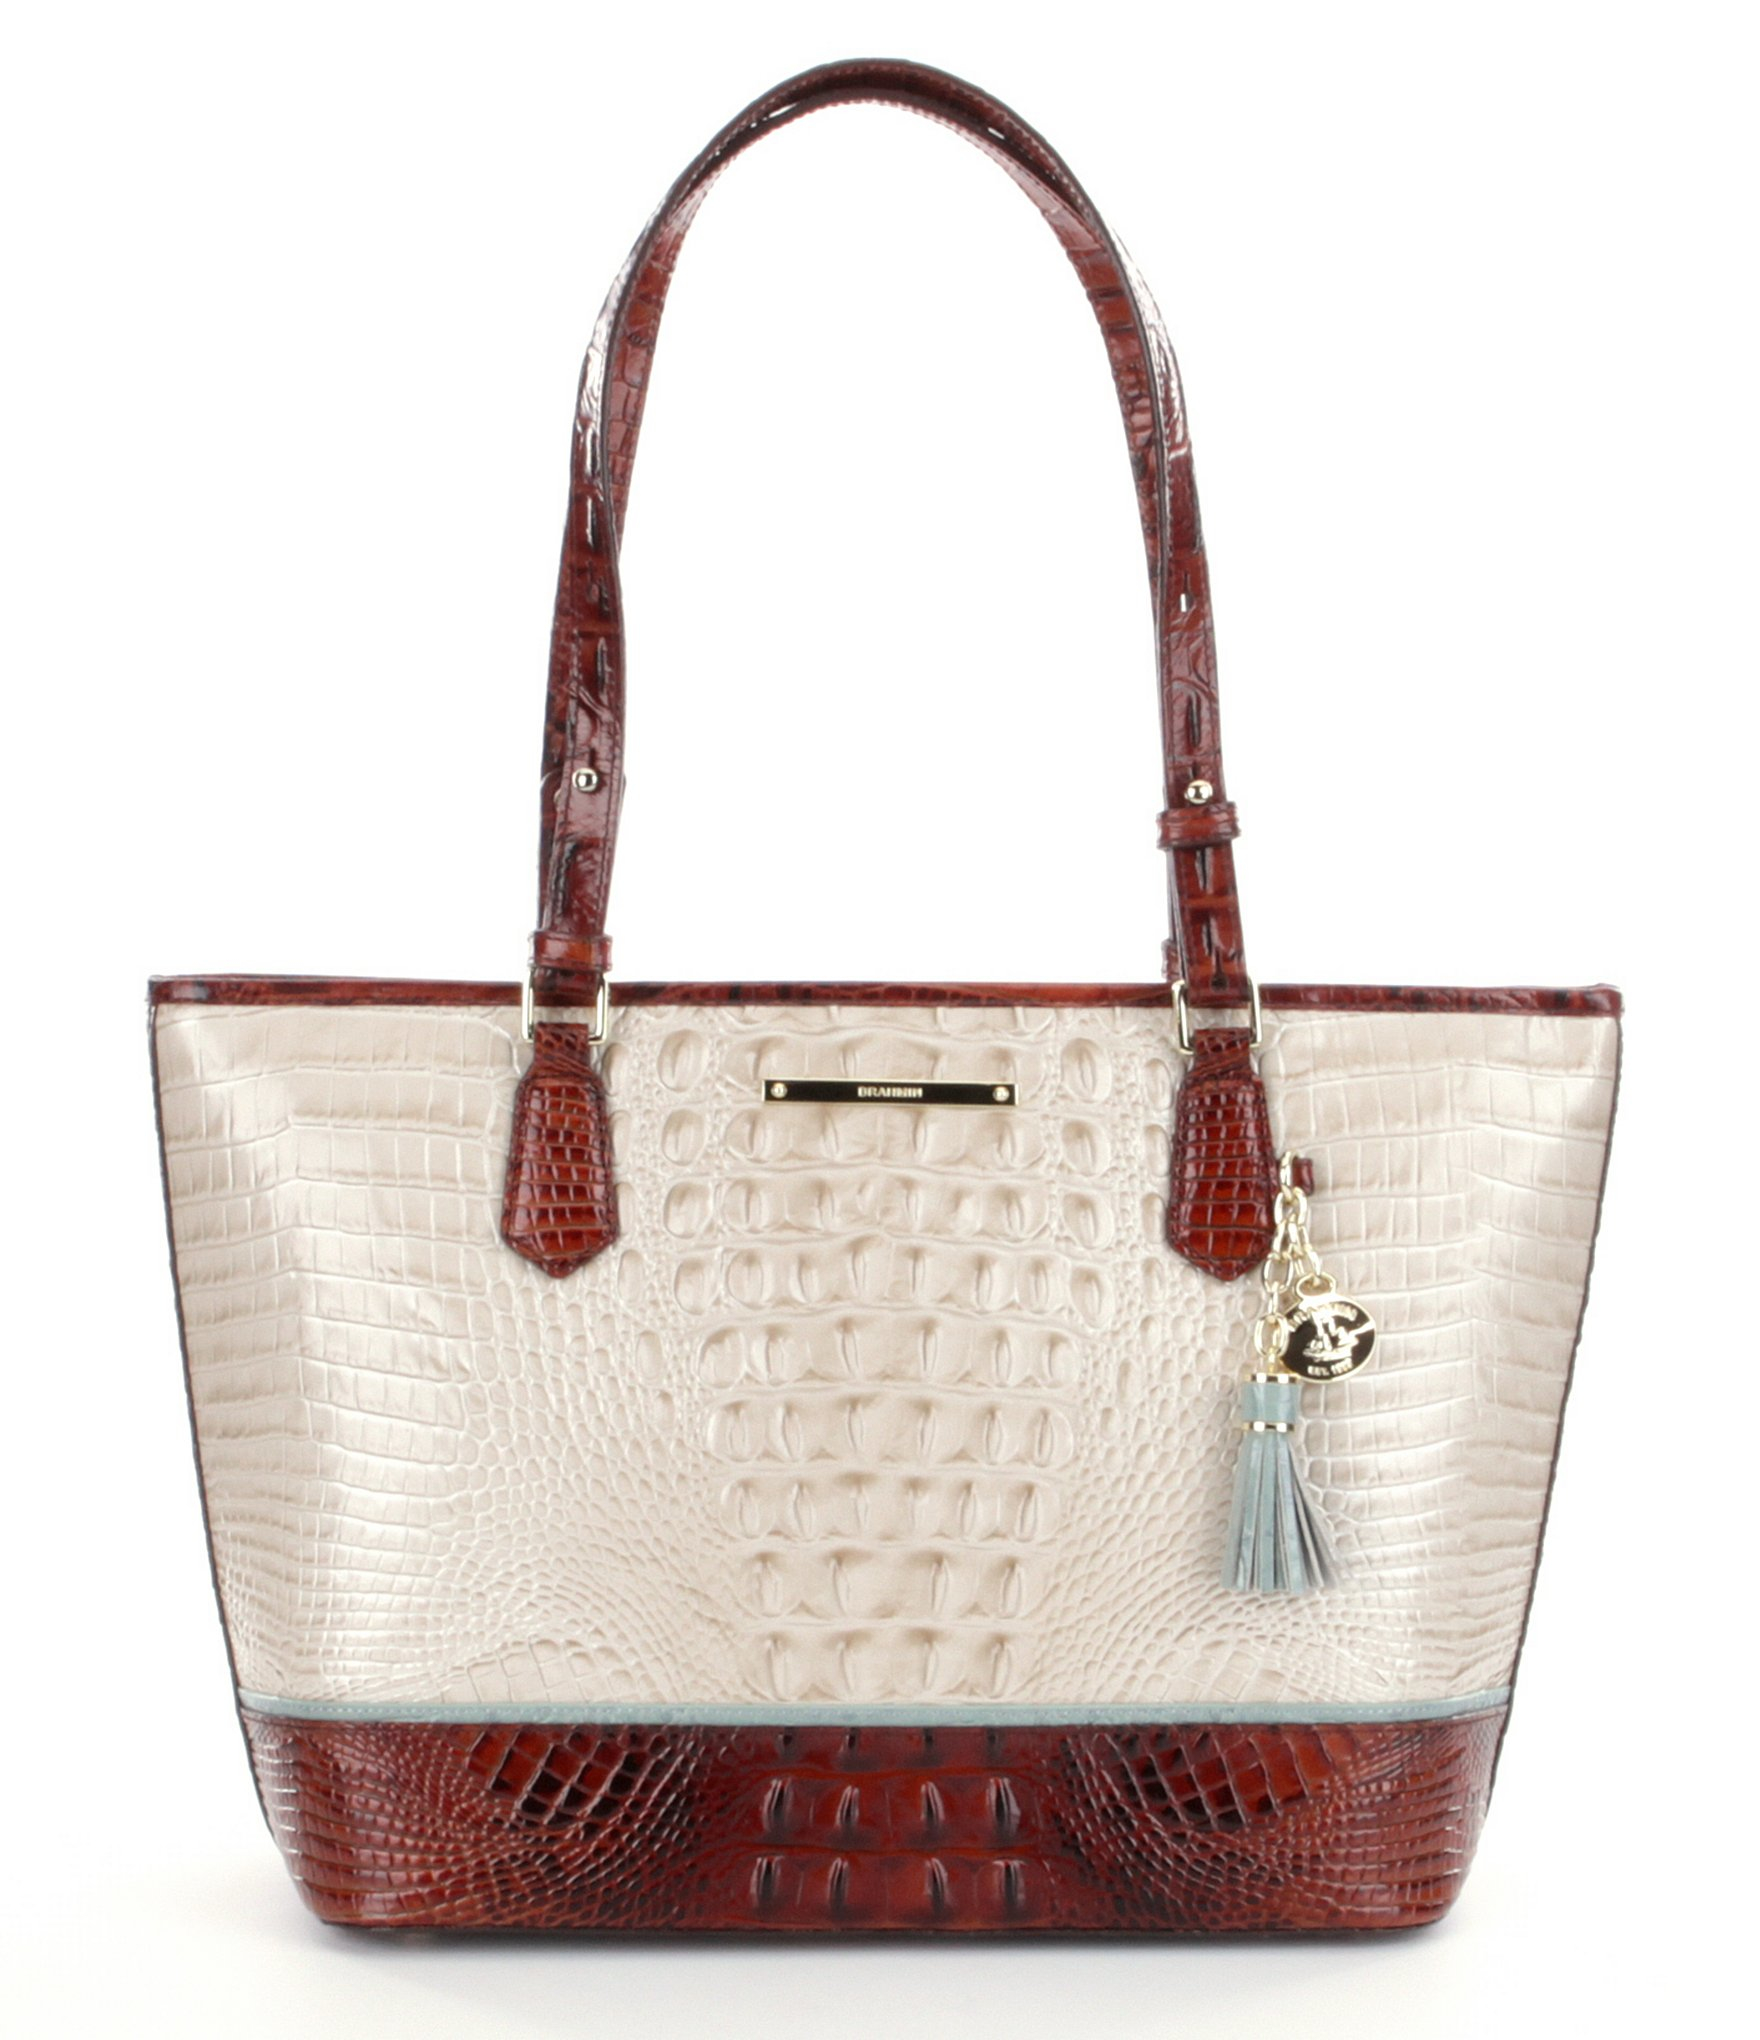 Lyst - Brahmin Tri-texture Collection Medium Asher Tote in Brown